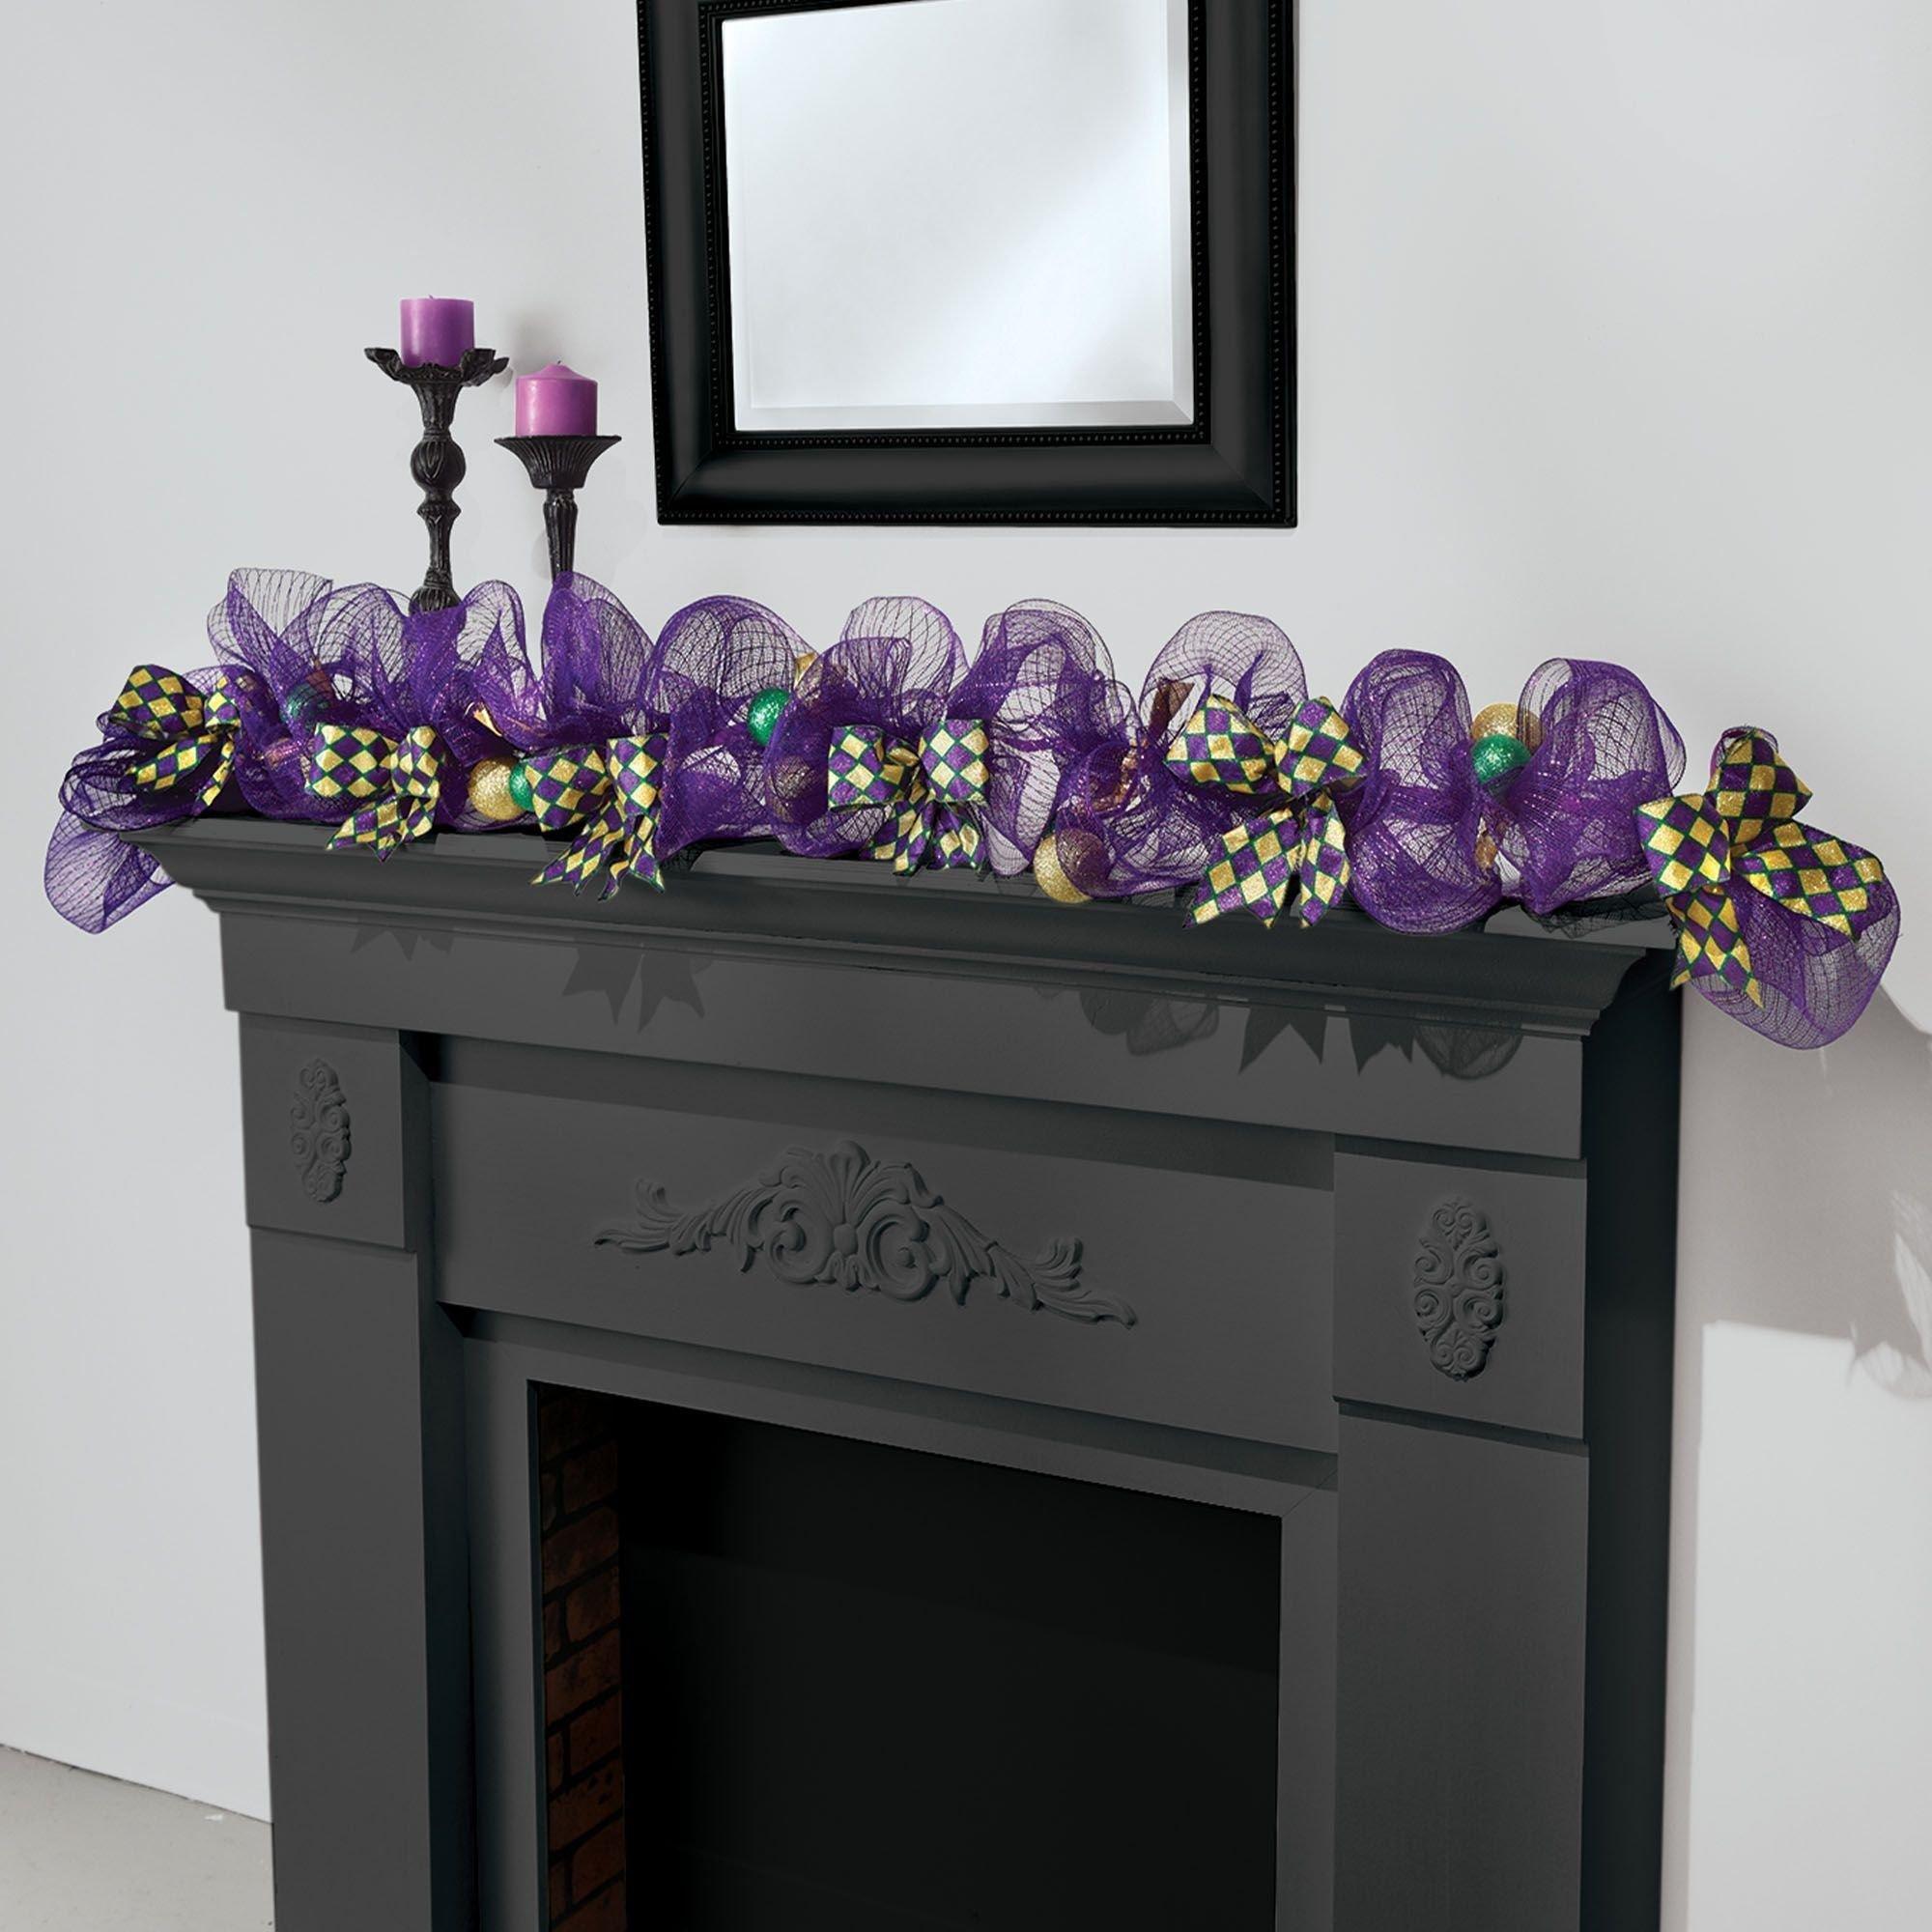 Party City Mardi Gras Decorations 2021: SNEAK PEAK! SHOP WITH ME!  Inspirations Holiday Decor 